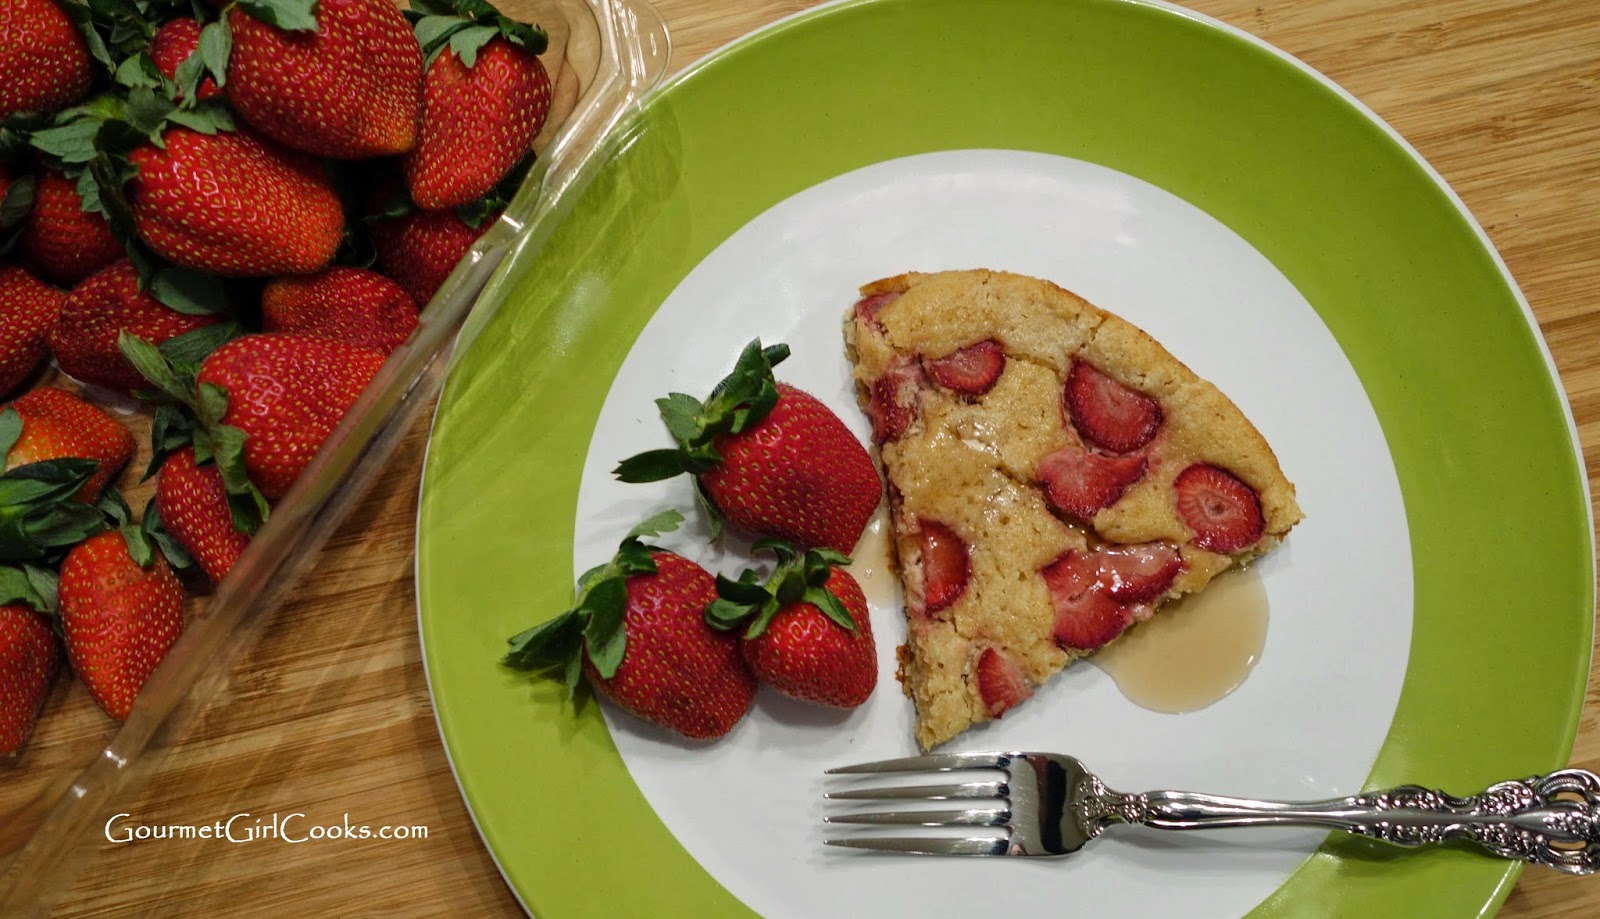 Gourmet Girl Cooks: Springtime Strawberry Surprise...Coming Soon to a ...